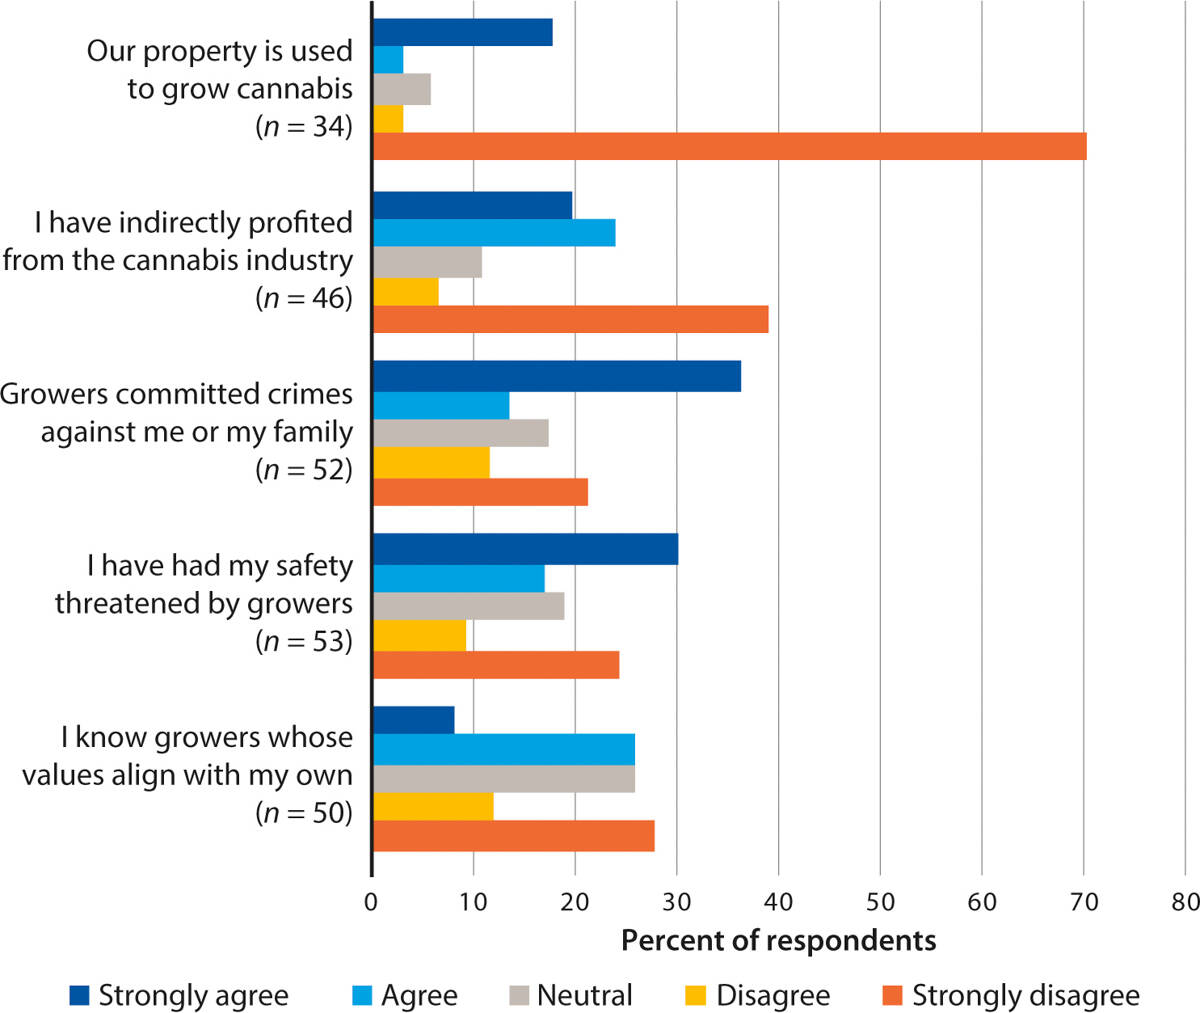 Survey respondents reported their direct experiences with cannabis. Not all respondents were comfortable sharing personal information — of 69 respondents who returned surveys, only 46 indicated whether they had indirectly profited from the cannabis industry and only 34 responded to a question about growing cannabis on their properties.